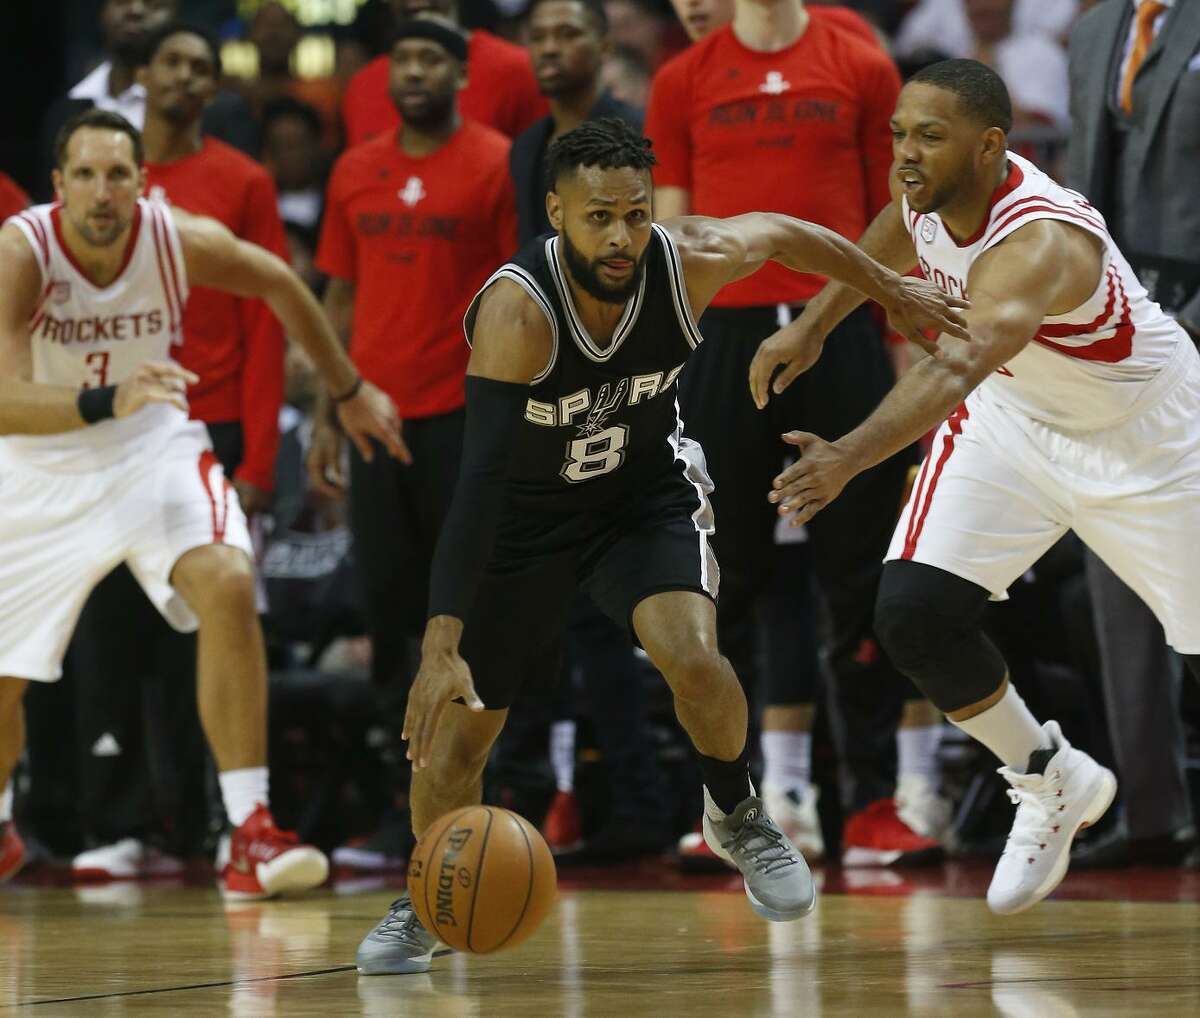 Ex-St. Mary's guard Patty Mills steps in and takes charge